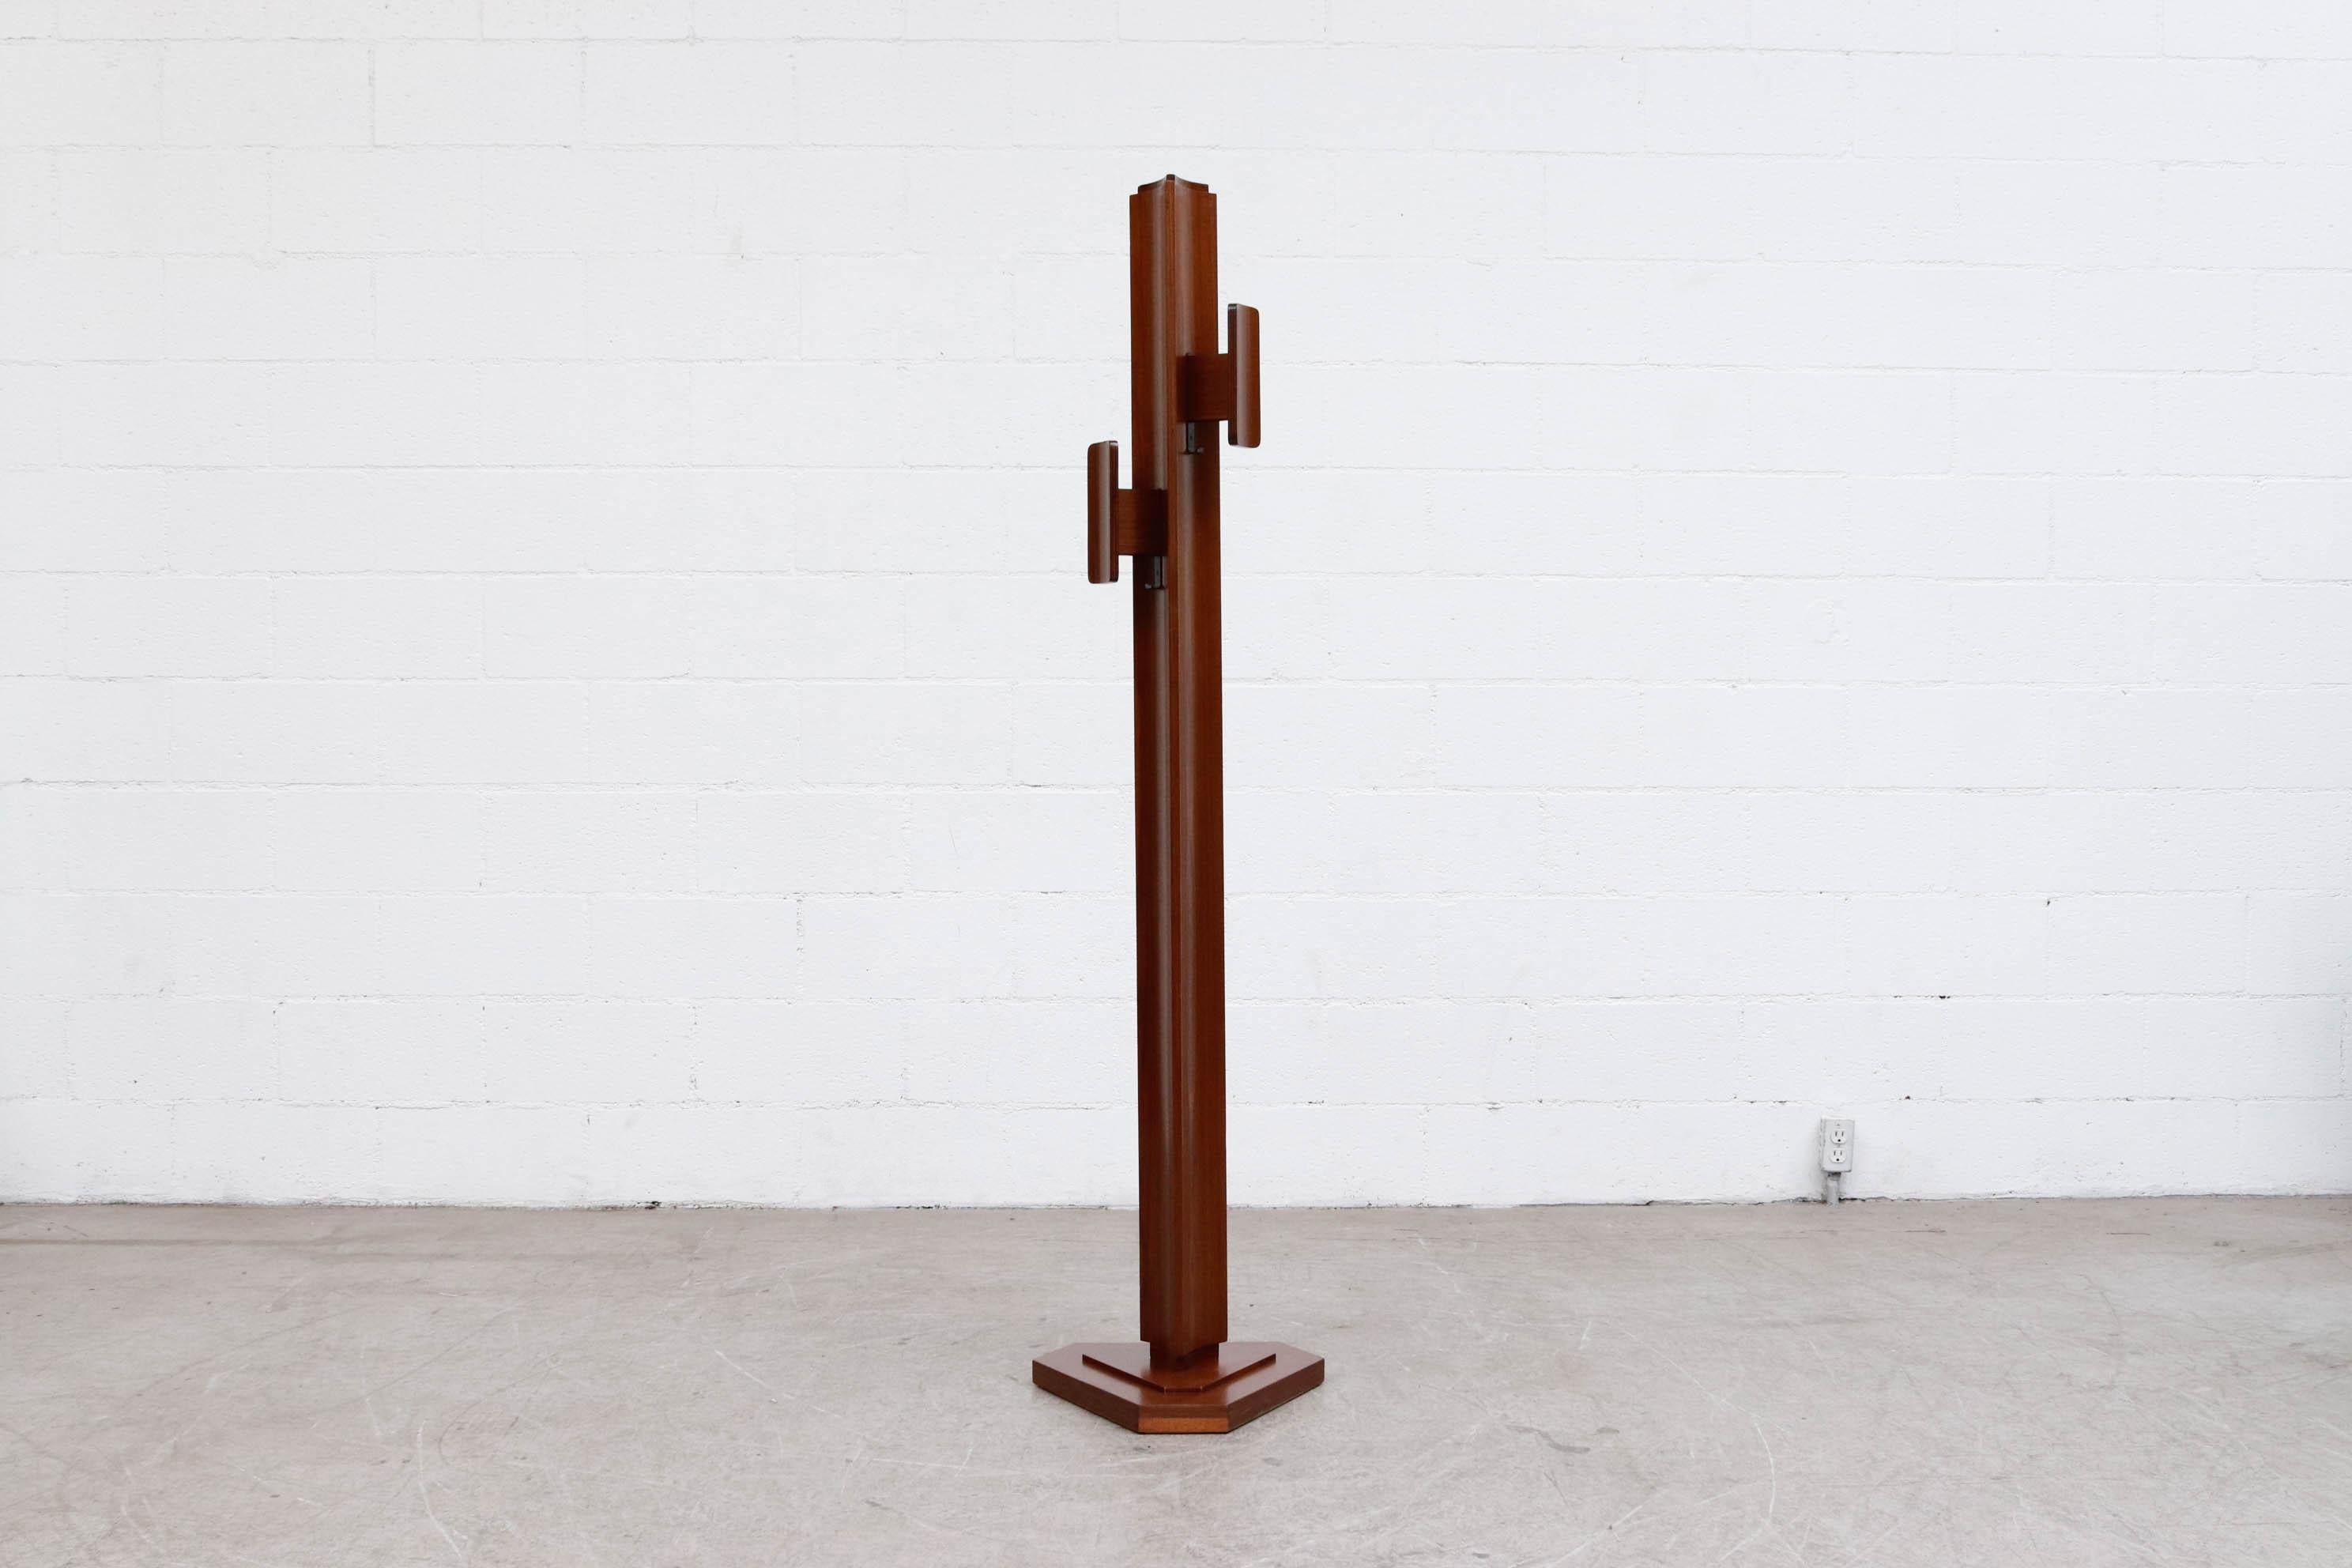 Italian Mod Brutalist style coat tree. Stunning triangular design with big block hooks (hooks measure 3.75 W x 7.875 H) in good original condition with light refinishing to the wood.